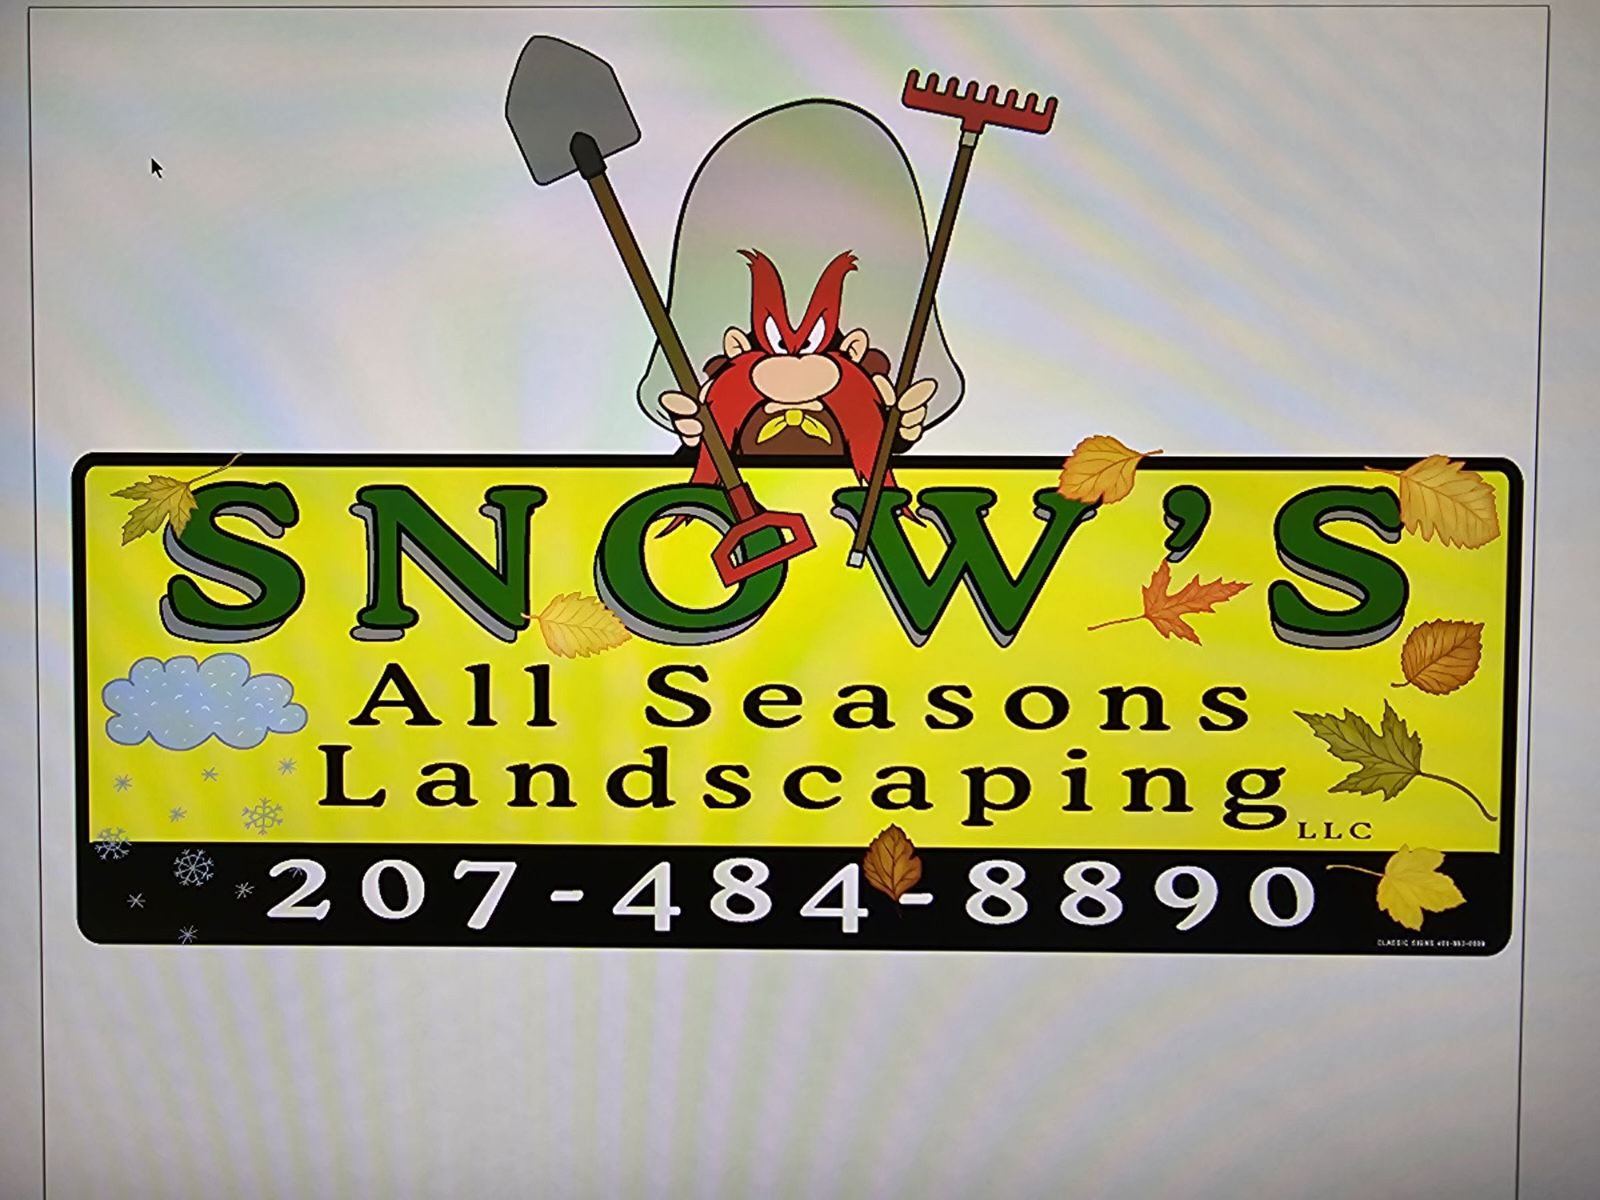 (Snows) all seasons landscaping